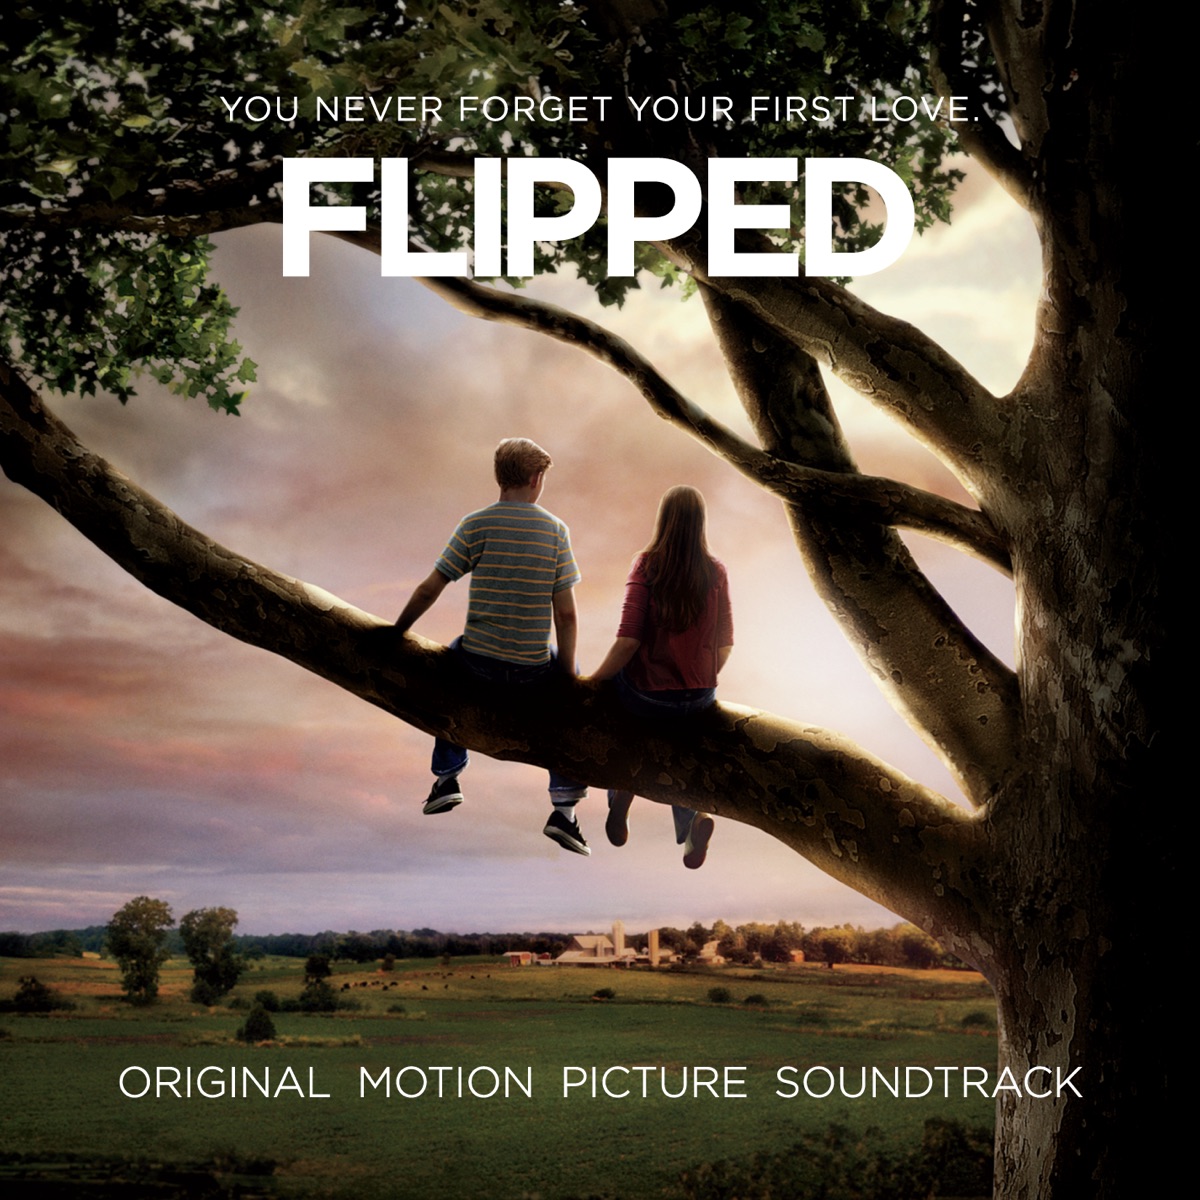 Flipped is a movie about young love, and is well worth your time.